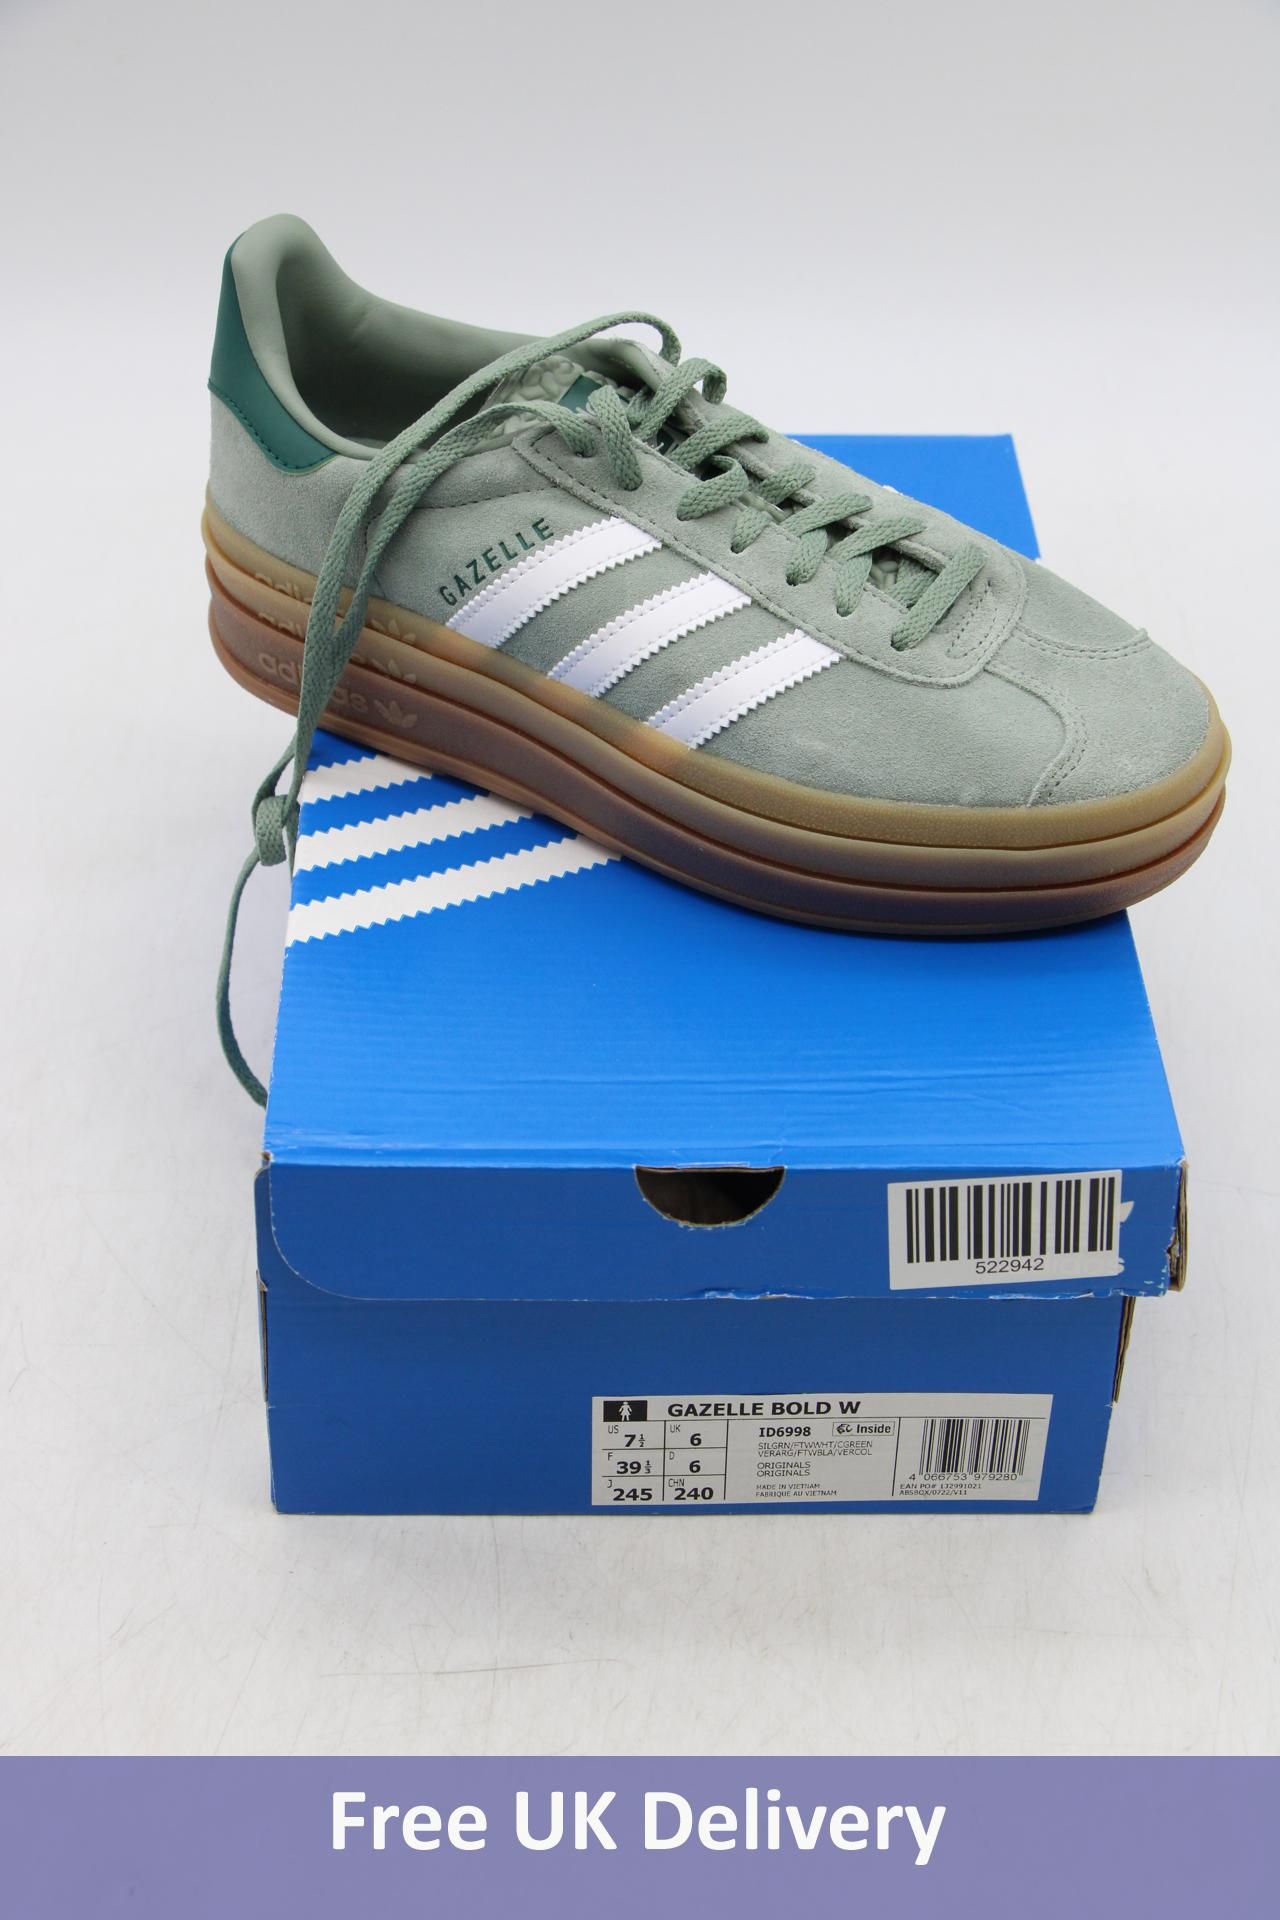 Adidas Gazelle Bold Suede Trainers, Green/Brown, UK 6. Box damaged